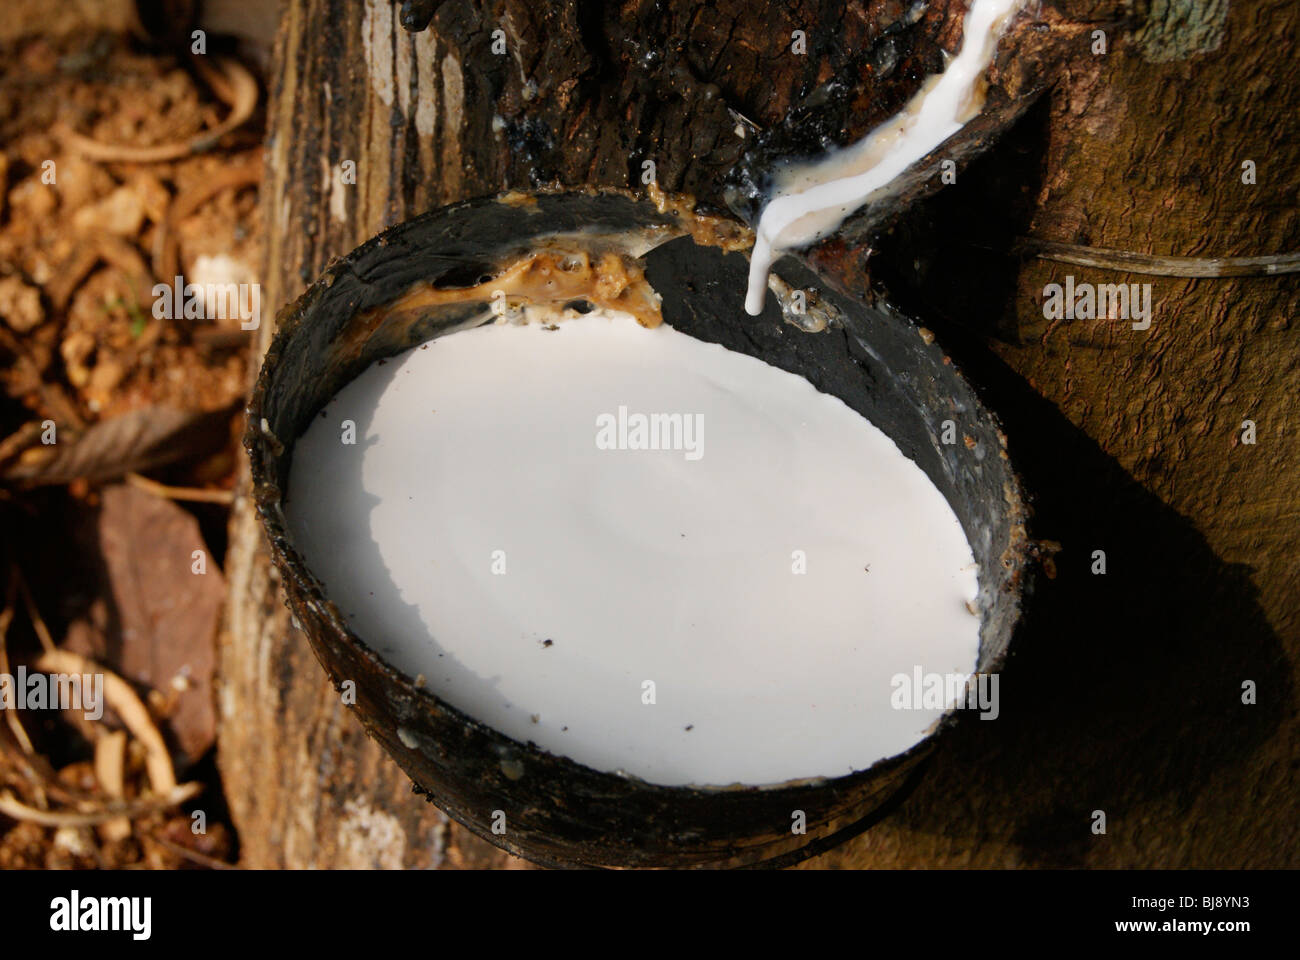 Fresh Natural rubber milk from a Rubber tree collecting in coconut Shells.Morning scene from Rubber plantations of Kerala,India Stock Photo